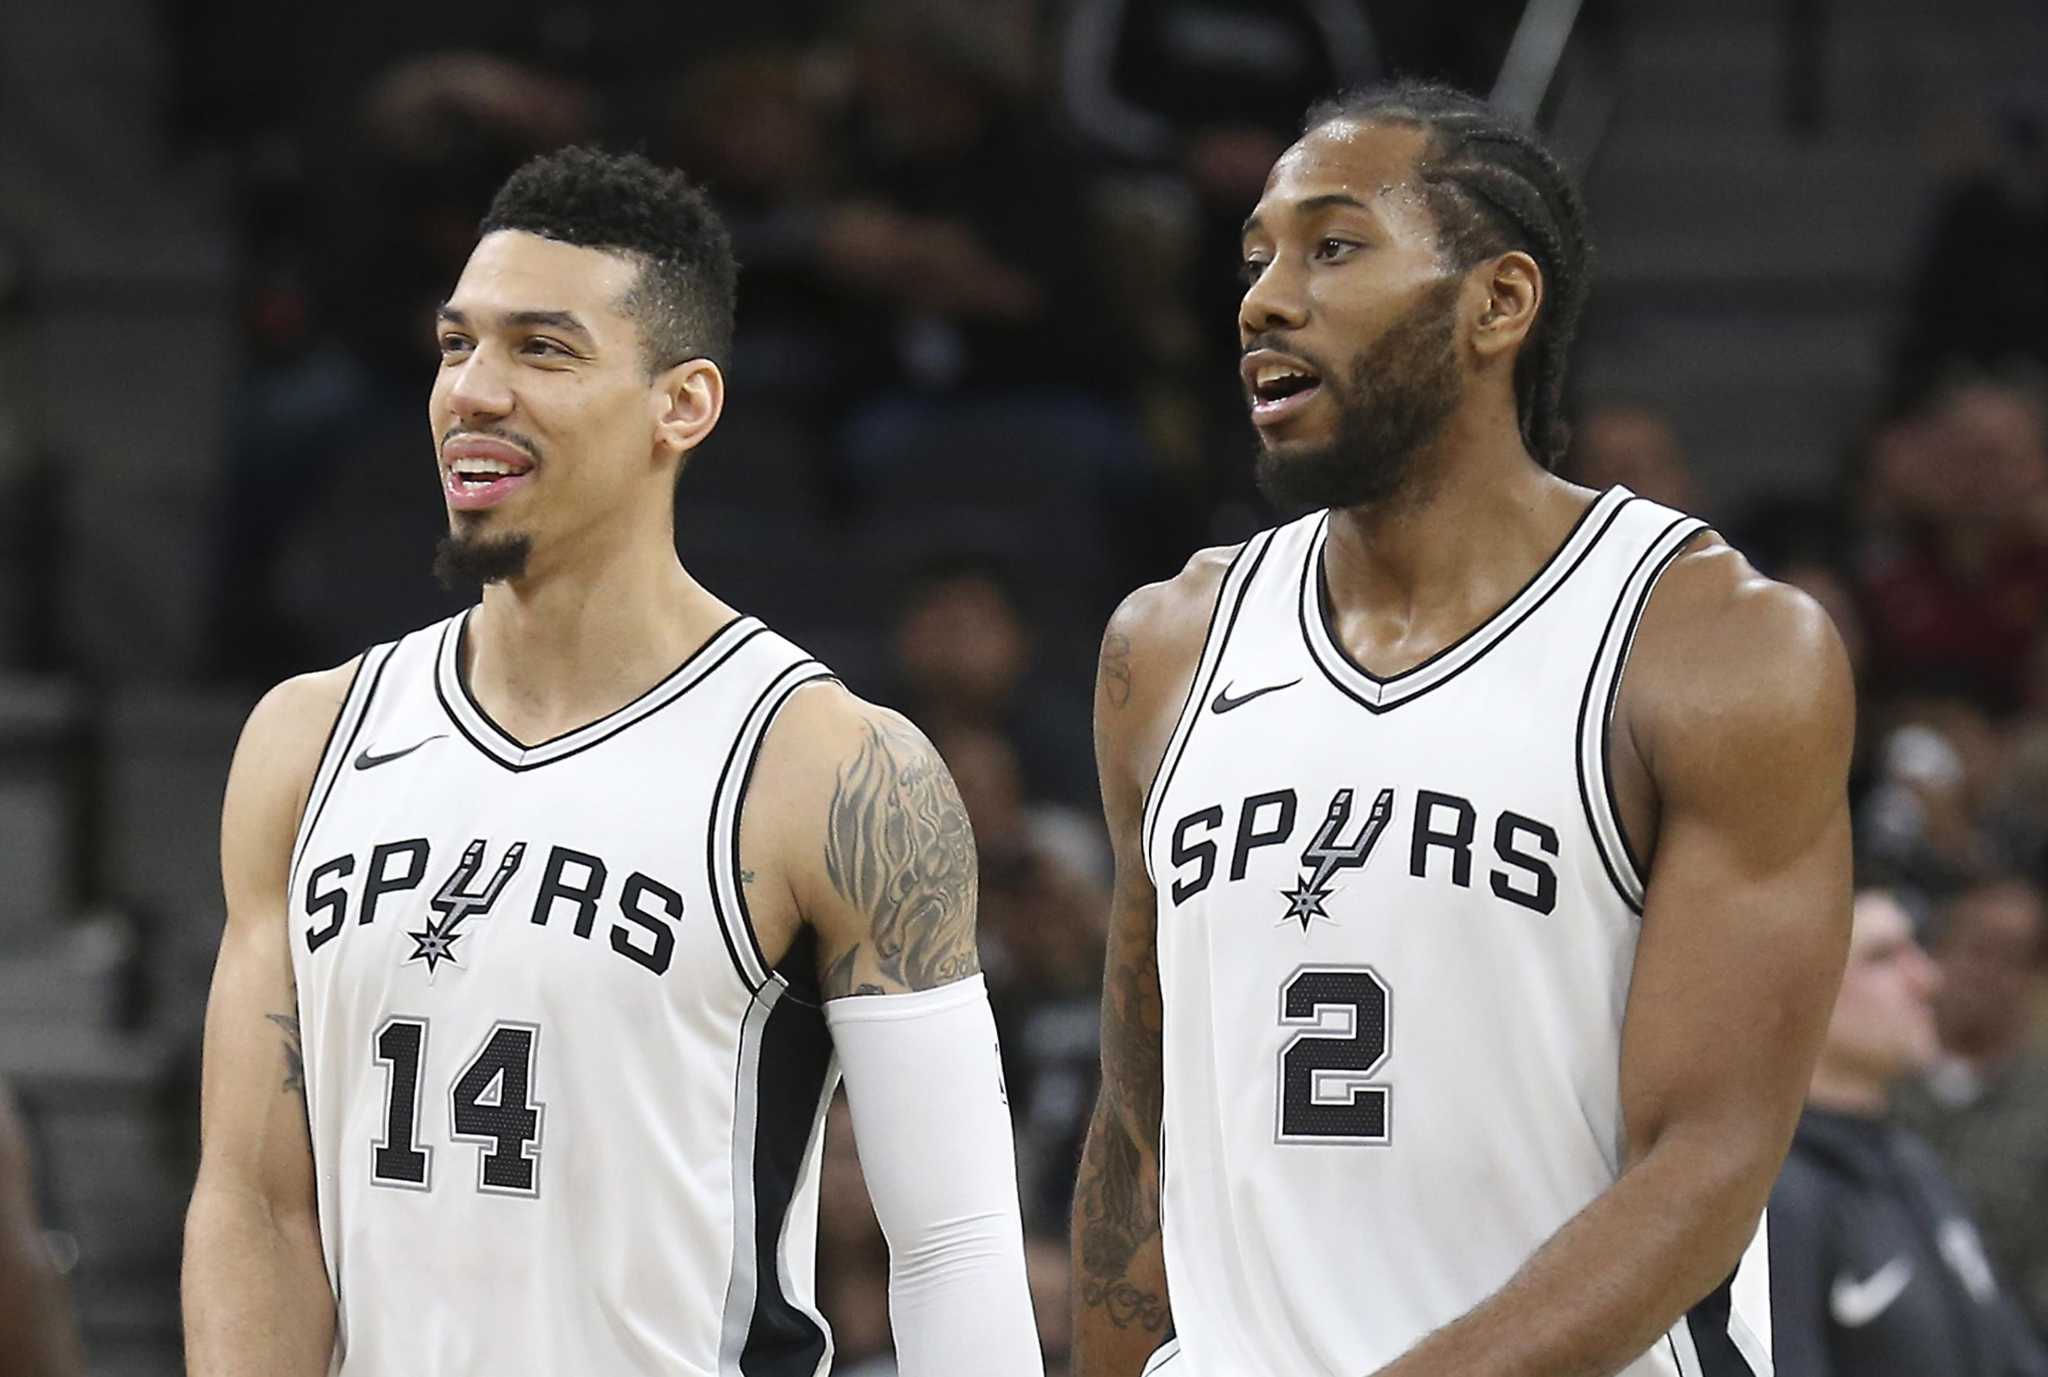 Danny Green's description of Kawhi Leonard when he first saw him: “He's  like a science experiment”